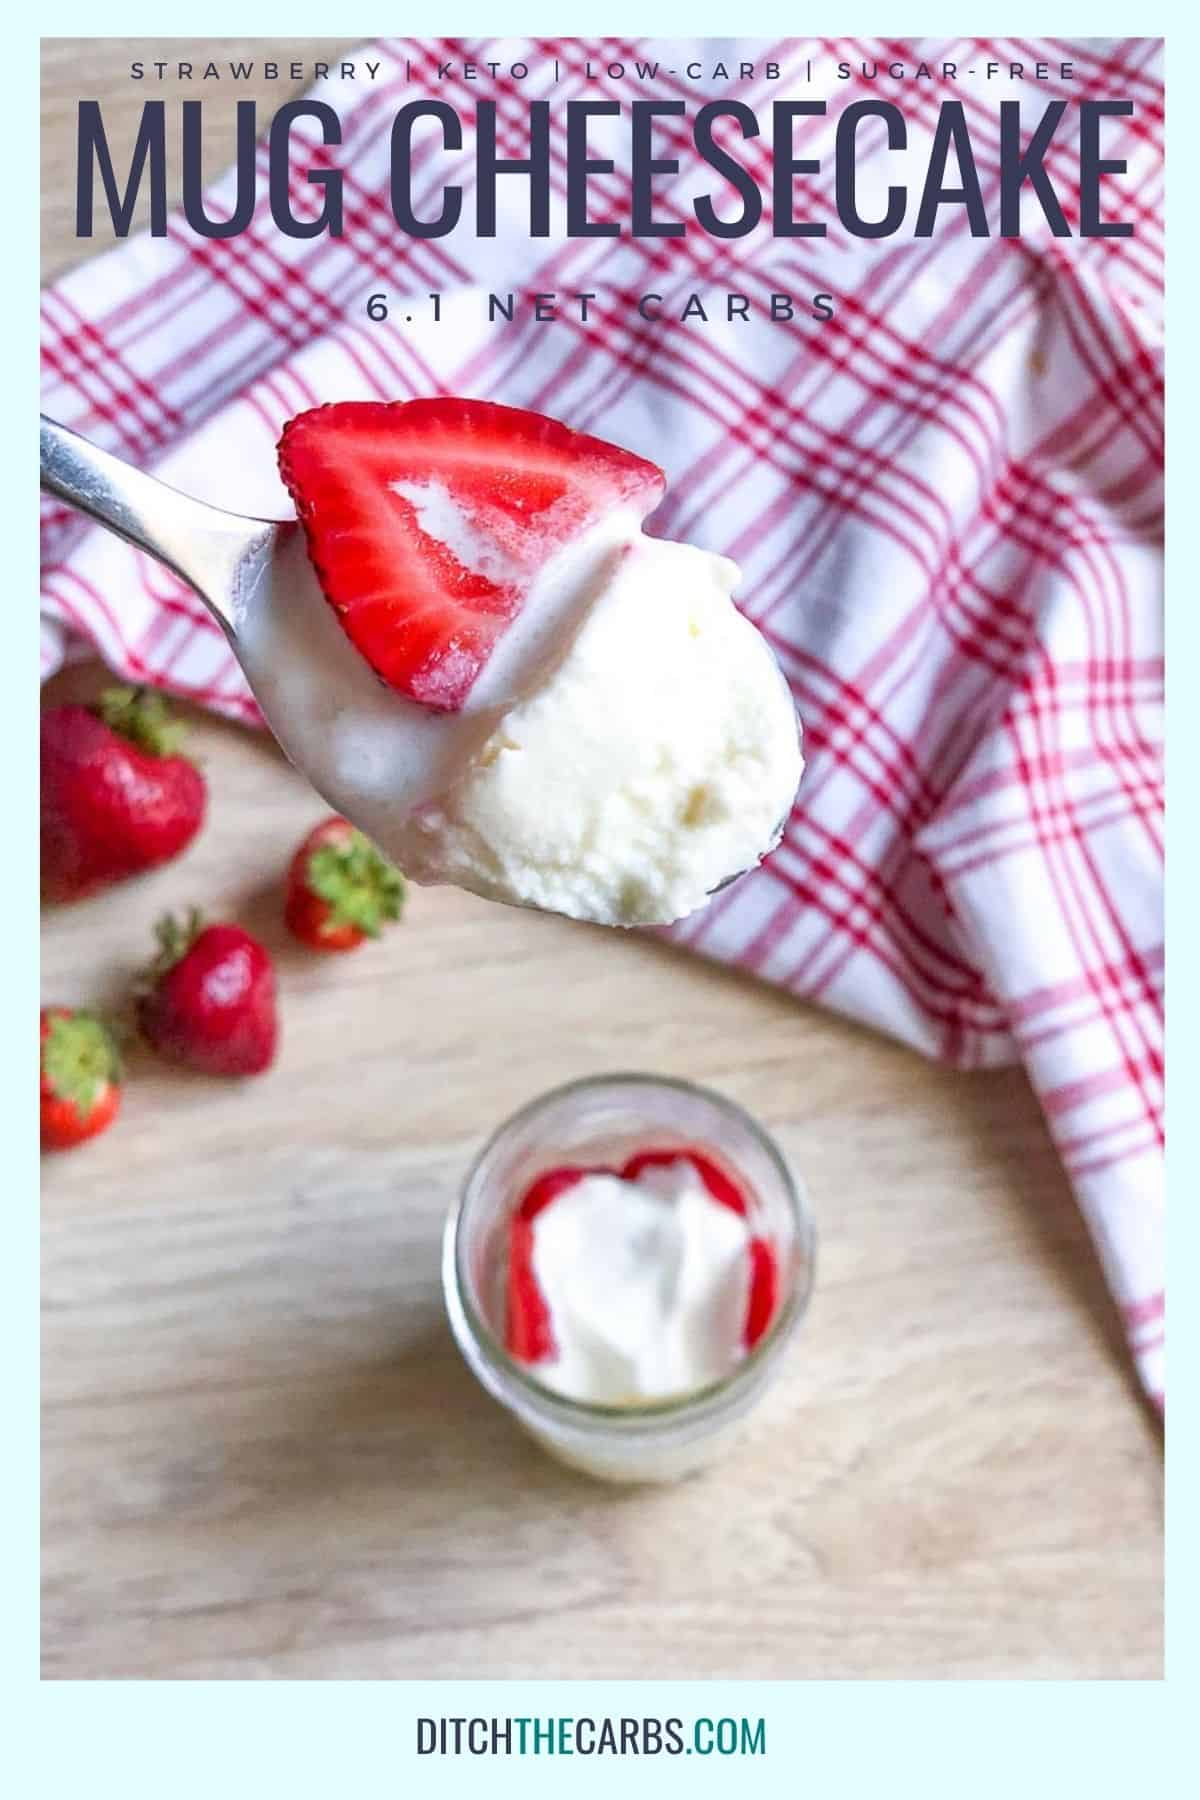 A spoon is lifting a bite of strawberry keto mug cheesecake from the cheesecake cooked in a clear glass jar. Strawberries are scatter on the table and a red checkered napkin is in the background.